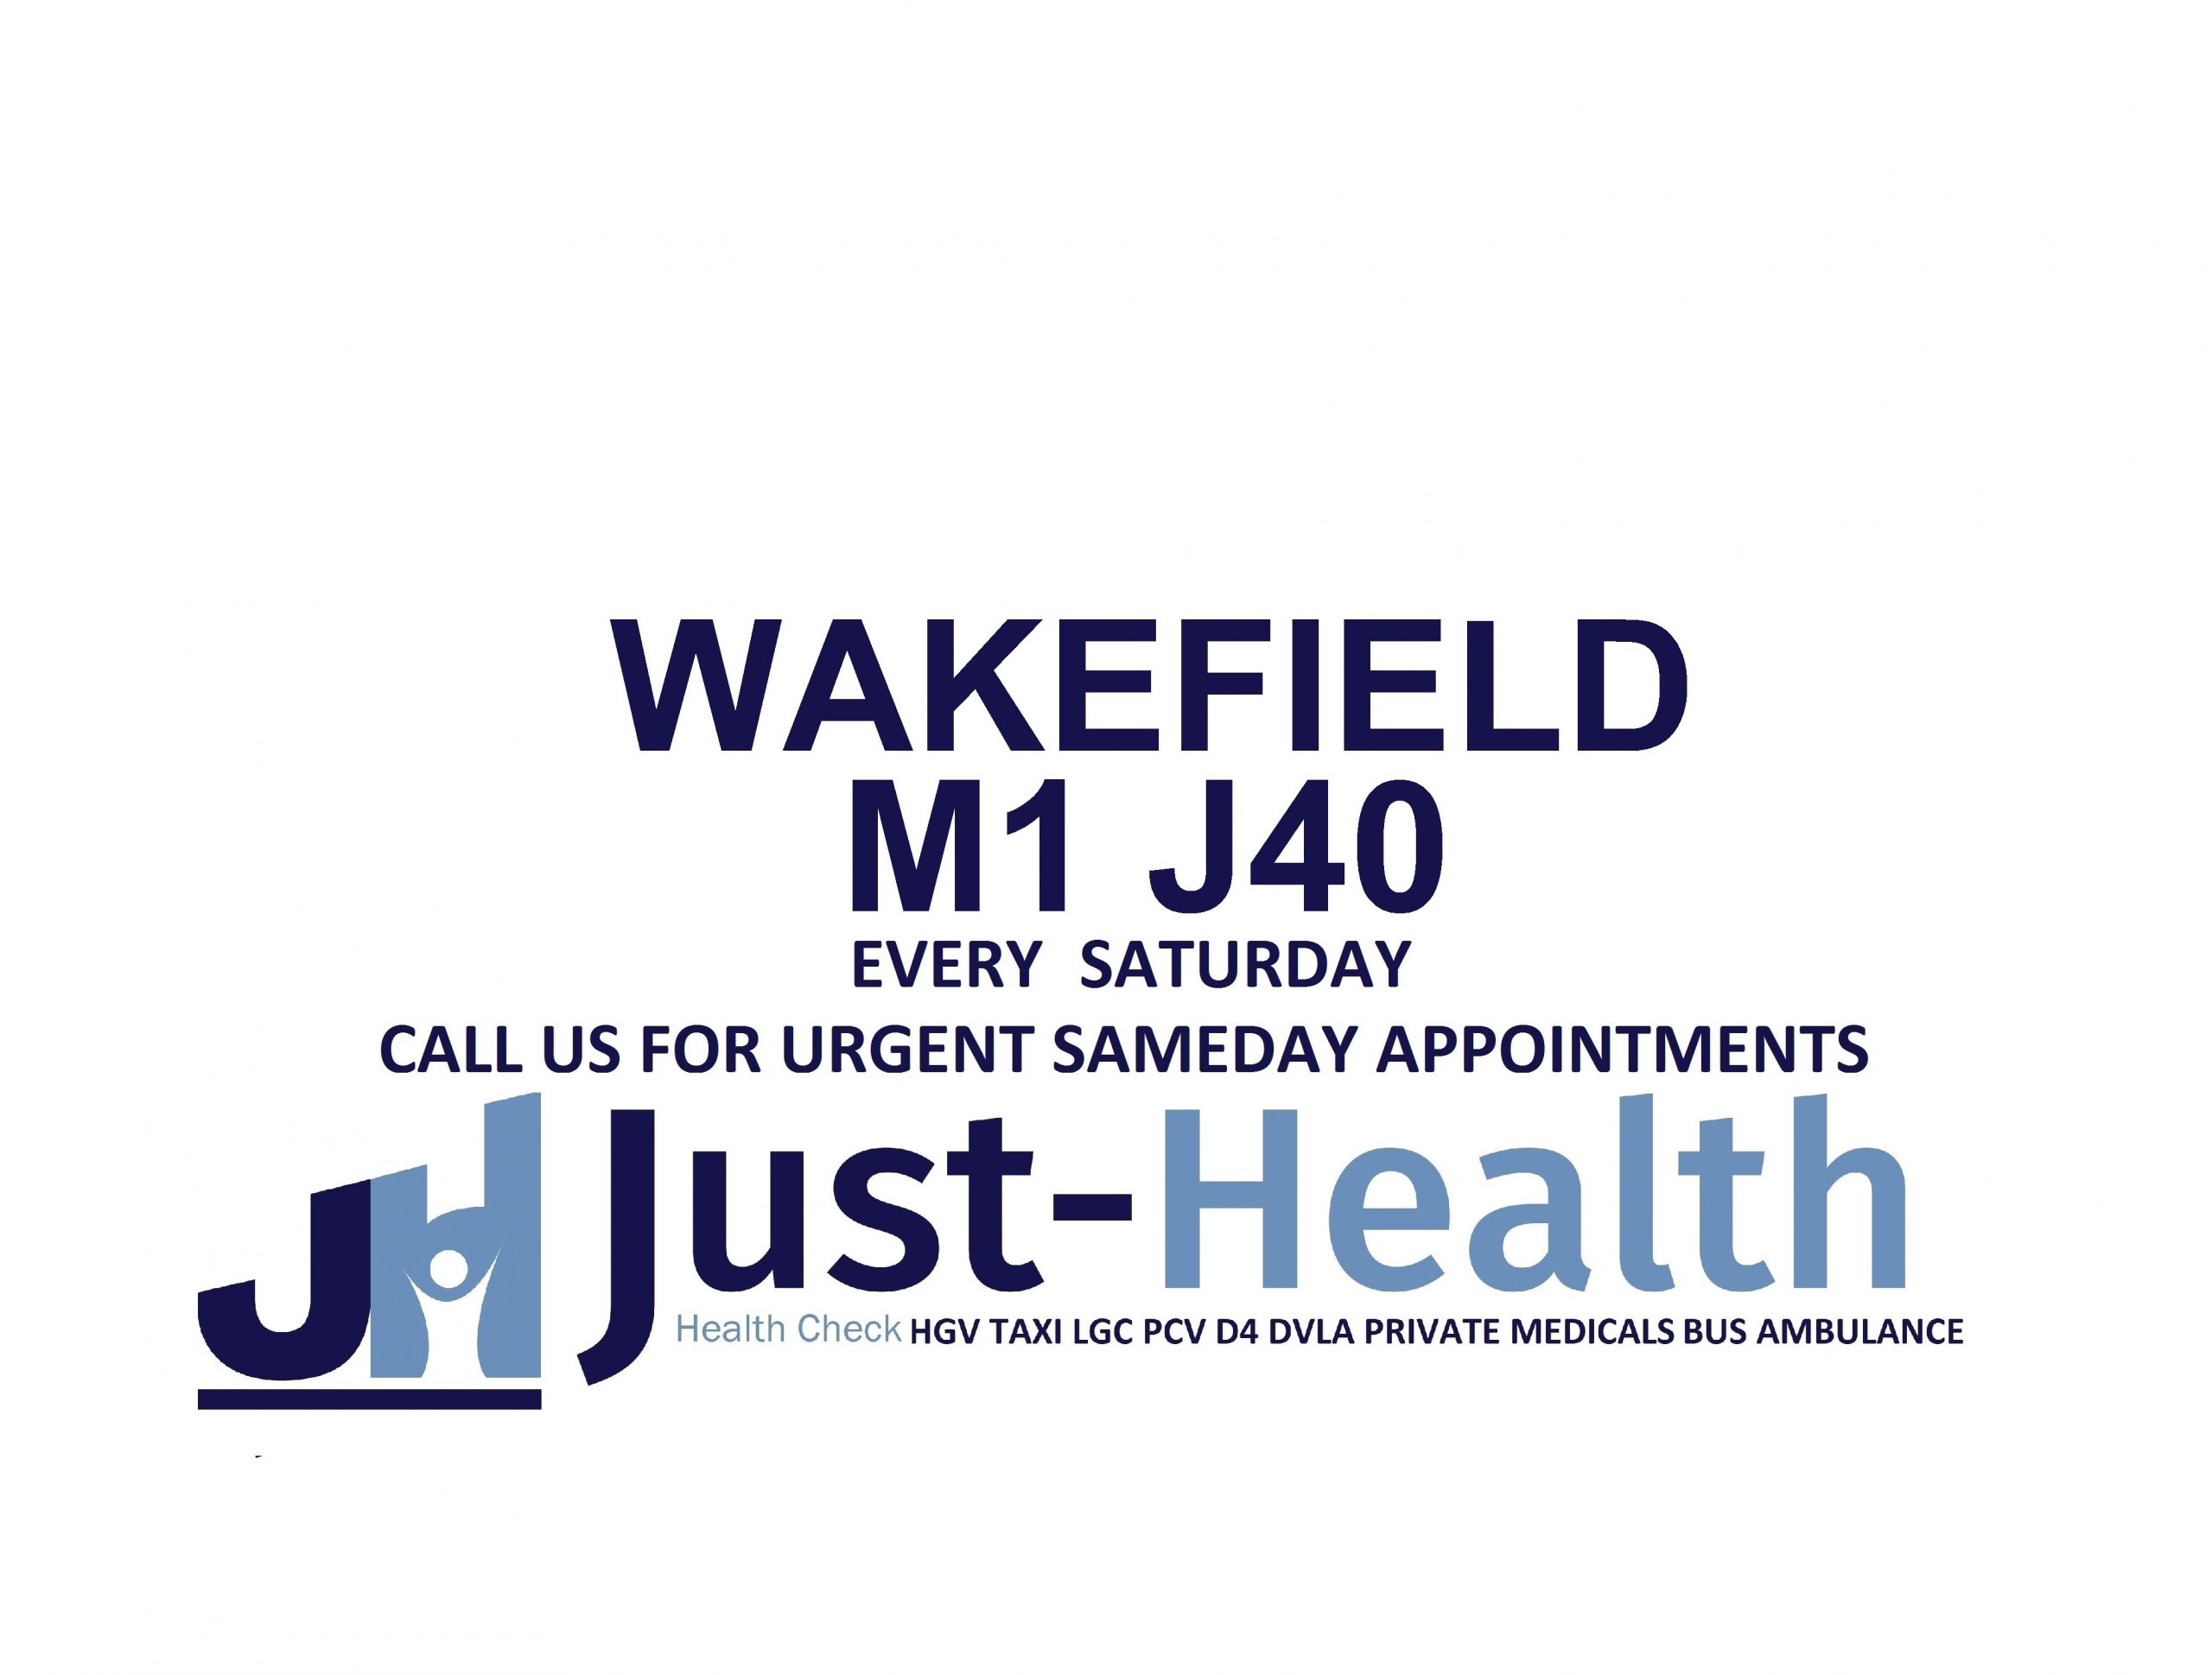 JUST HEALTH HGV D4 Medical wakefield Taxi Medical drivers c1